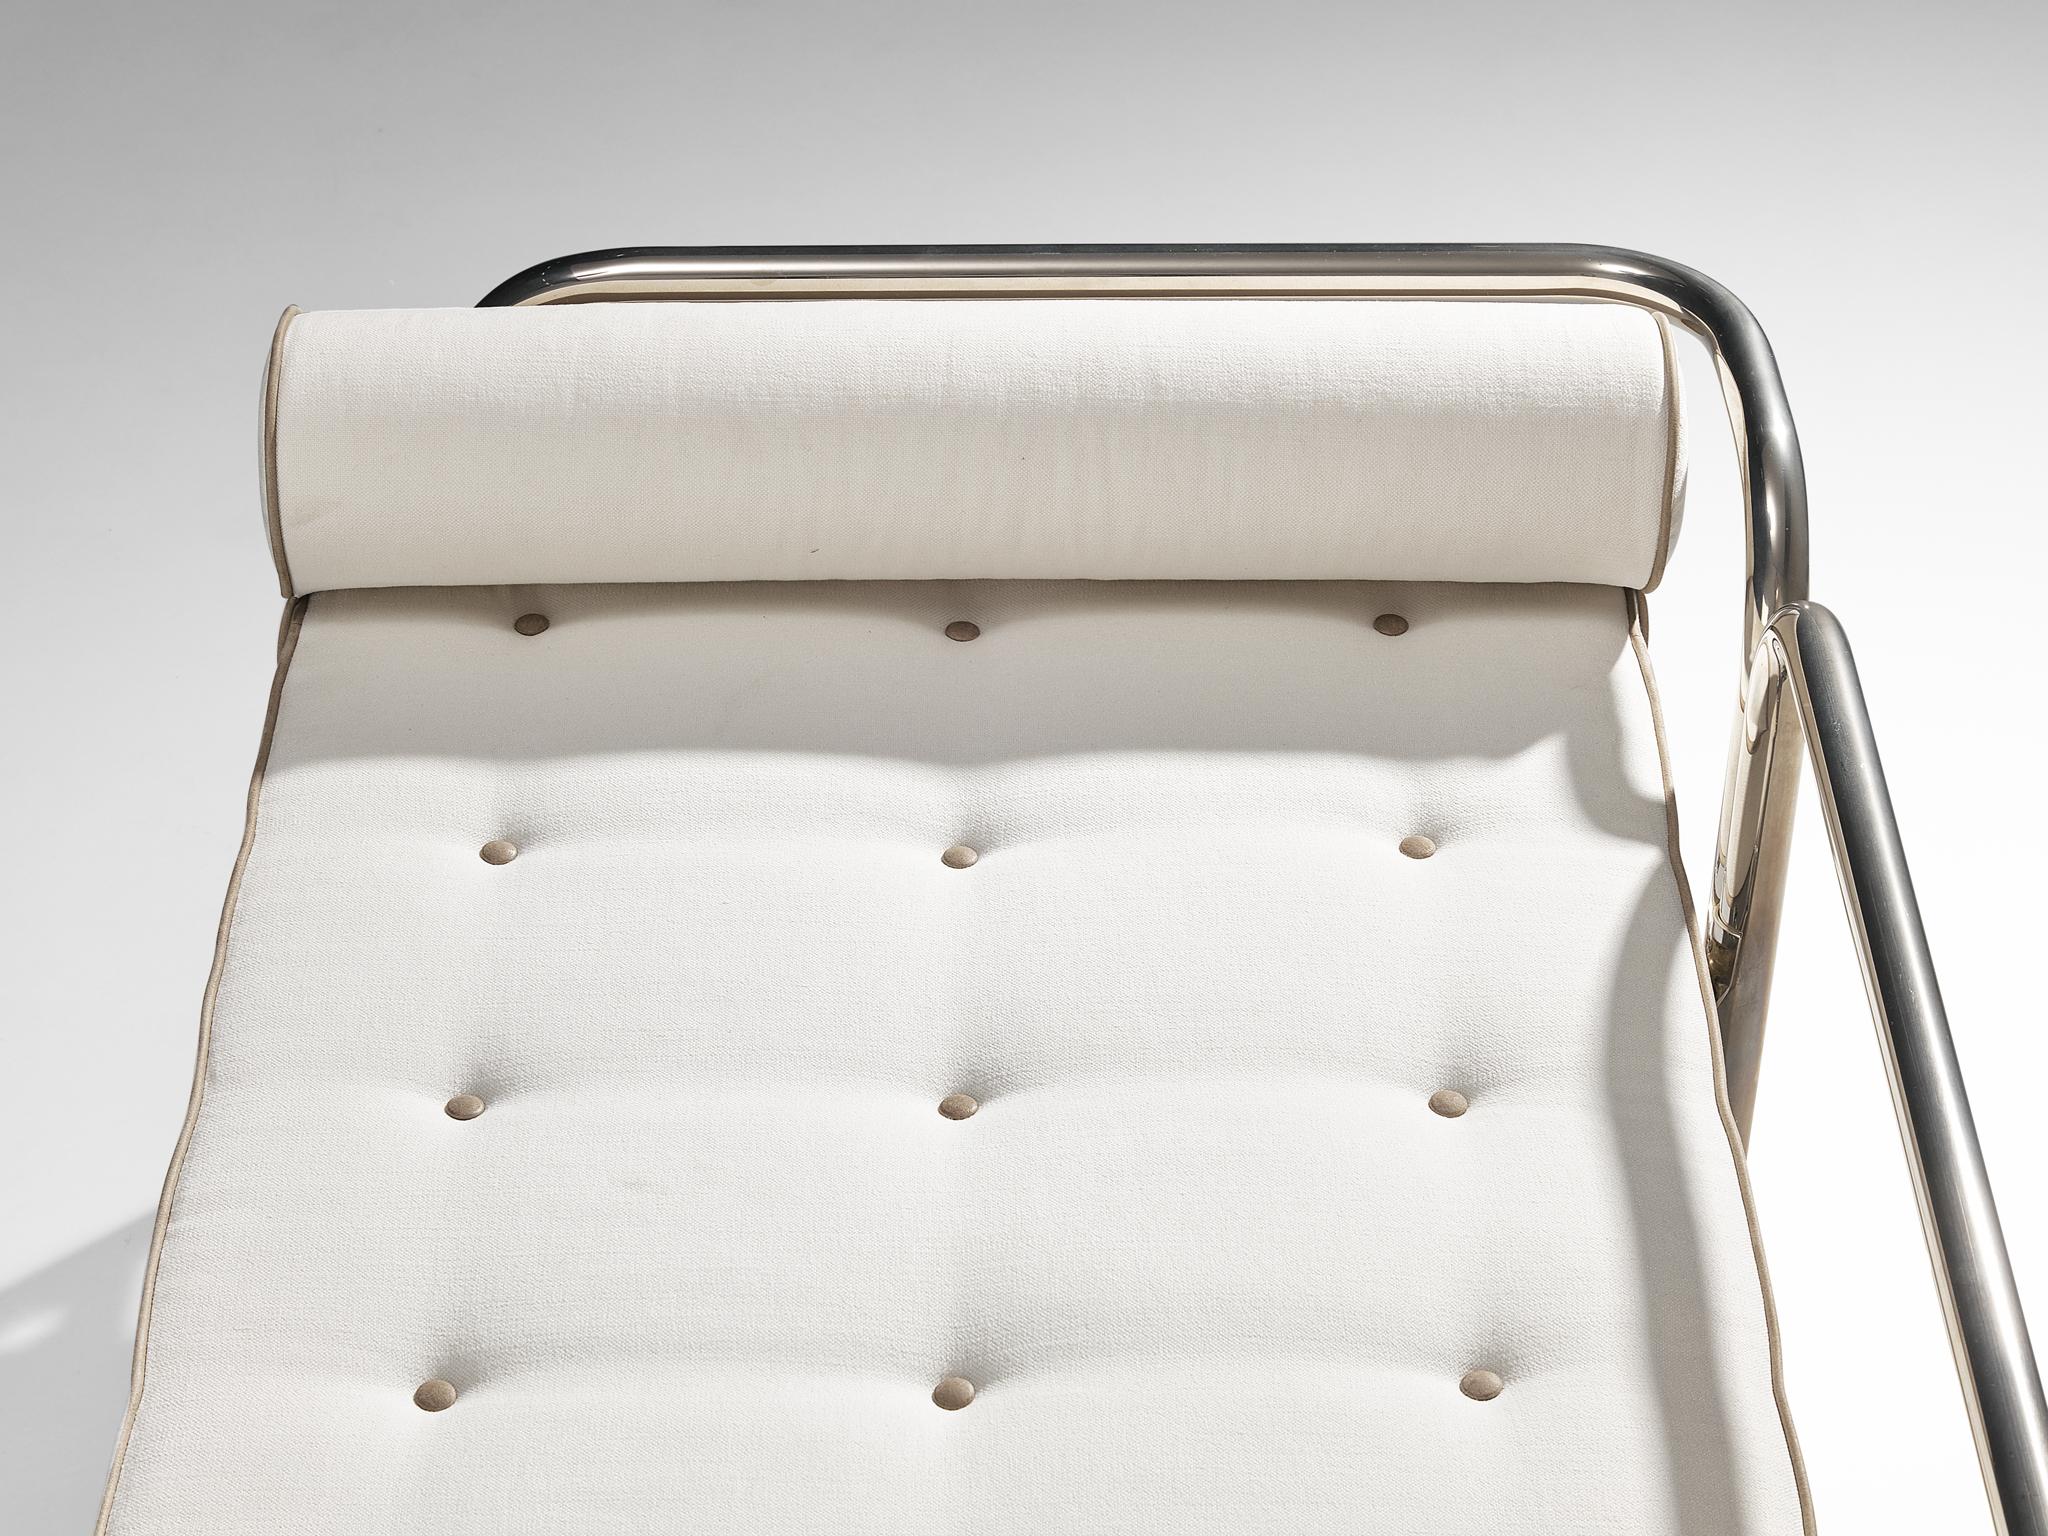 Italian Gae Aulenti for Poltronova 'Locus Solus' Daybed in Chrome-Plated Steel